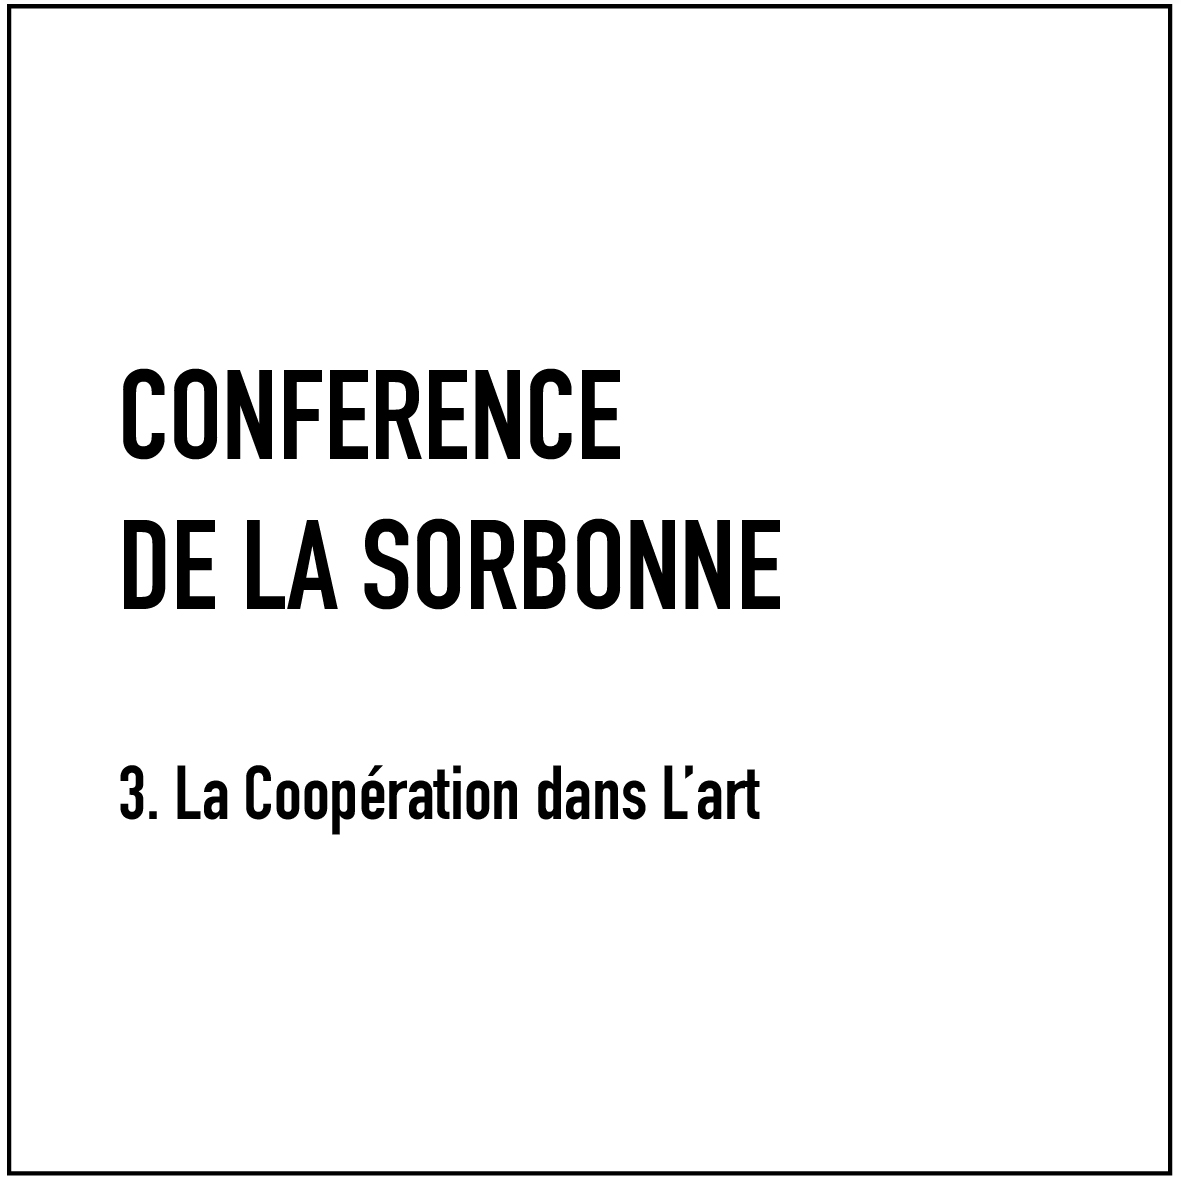 Lecture at the Sorbonne - 3. Cooperation in Art